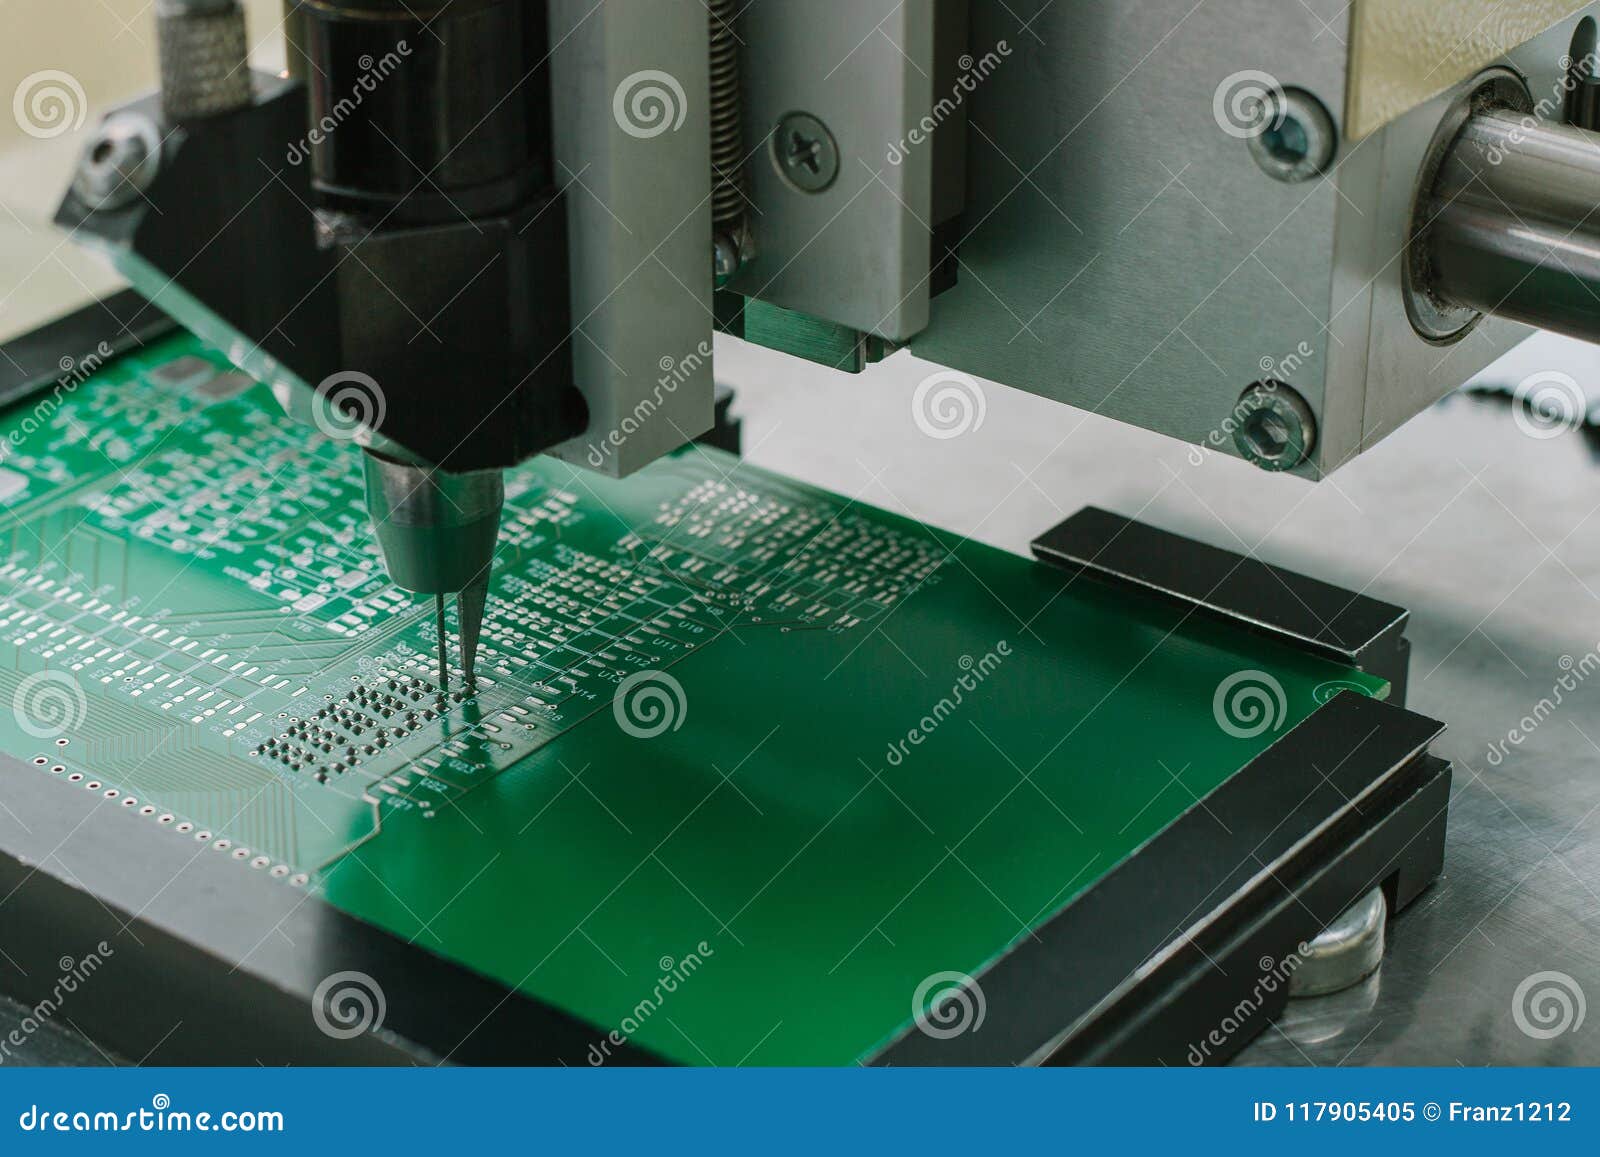 industrial production of circuit microcircuits. manufacture of computer components and boards